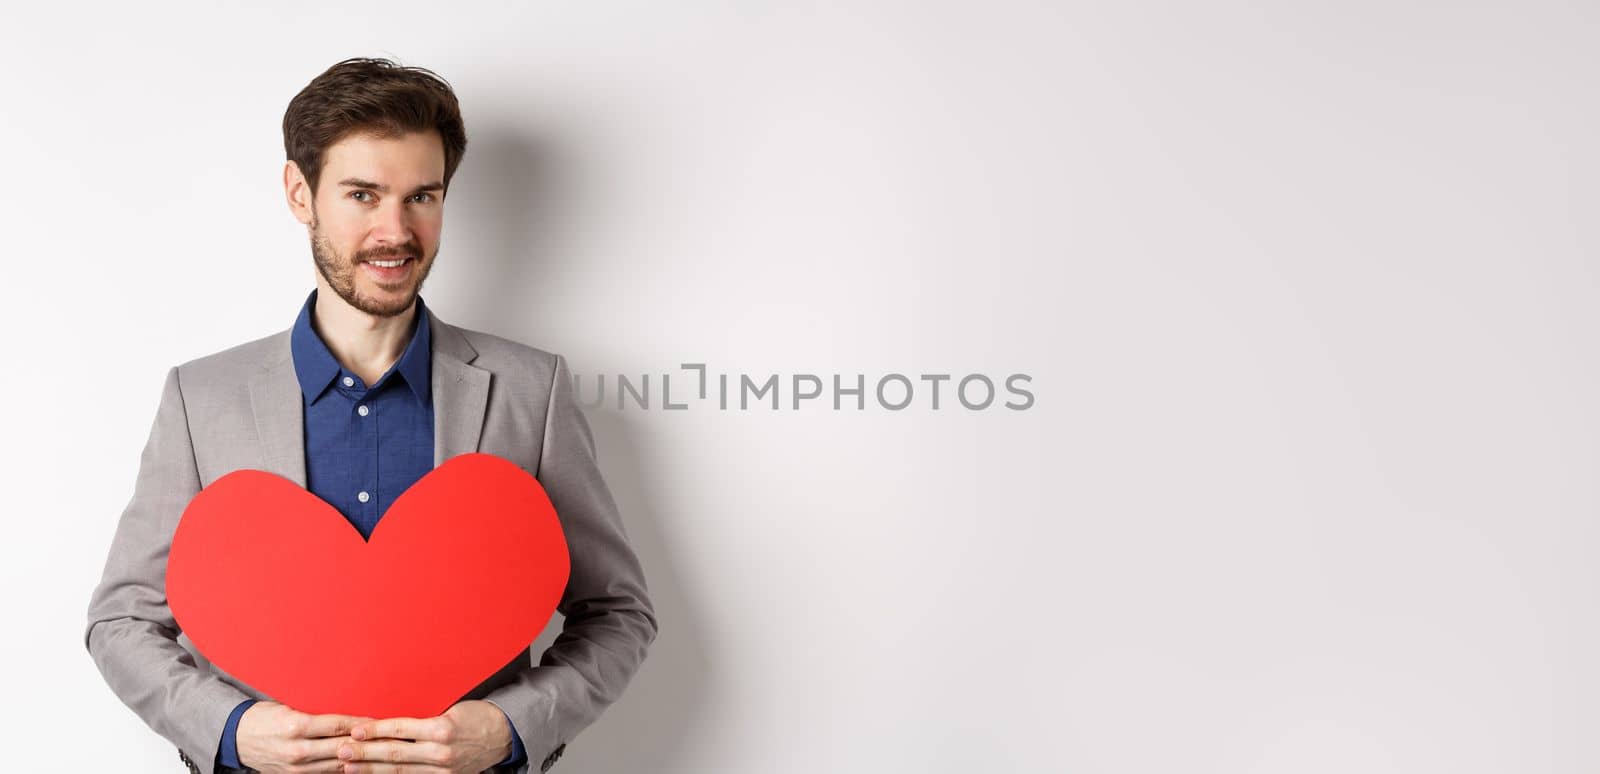 Handsome bearded man wishing happy valentines day, holding red heart cutout and smiling, going on romantic date in fancy suit, standing over white background.